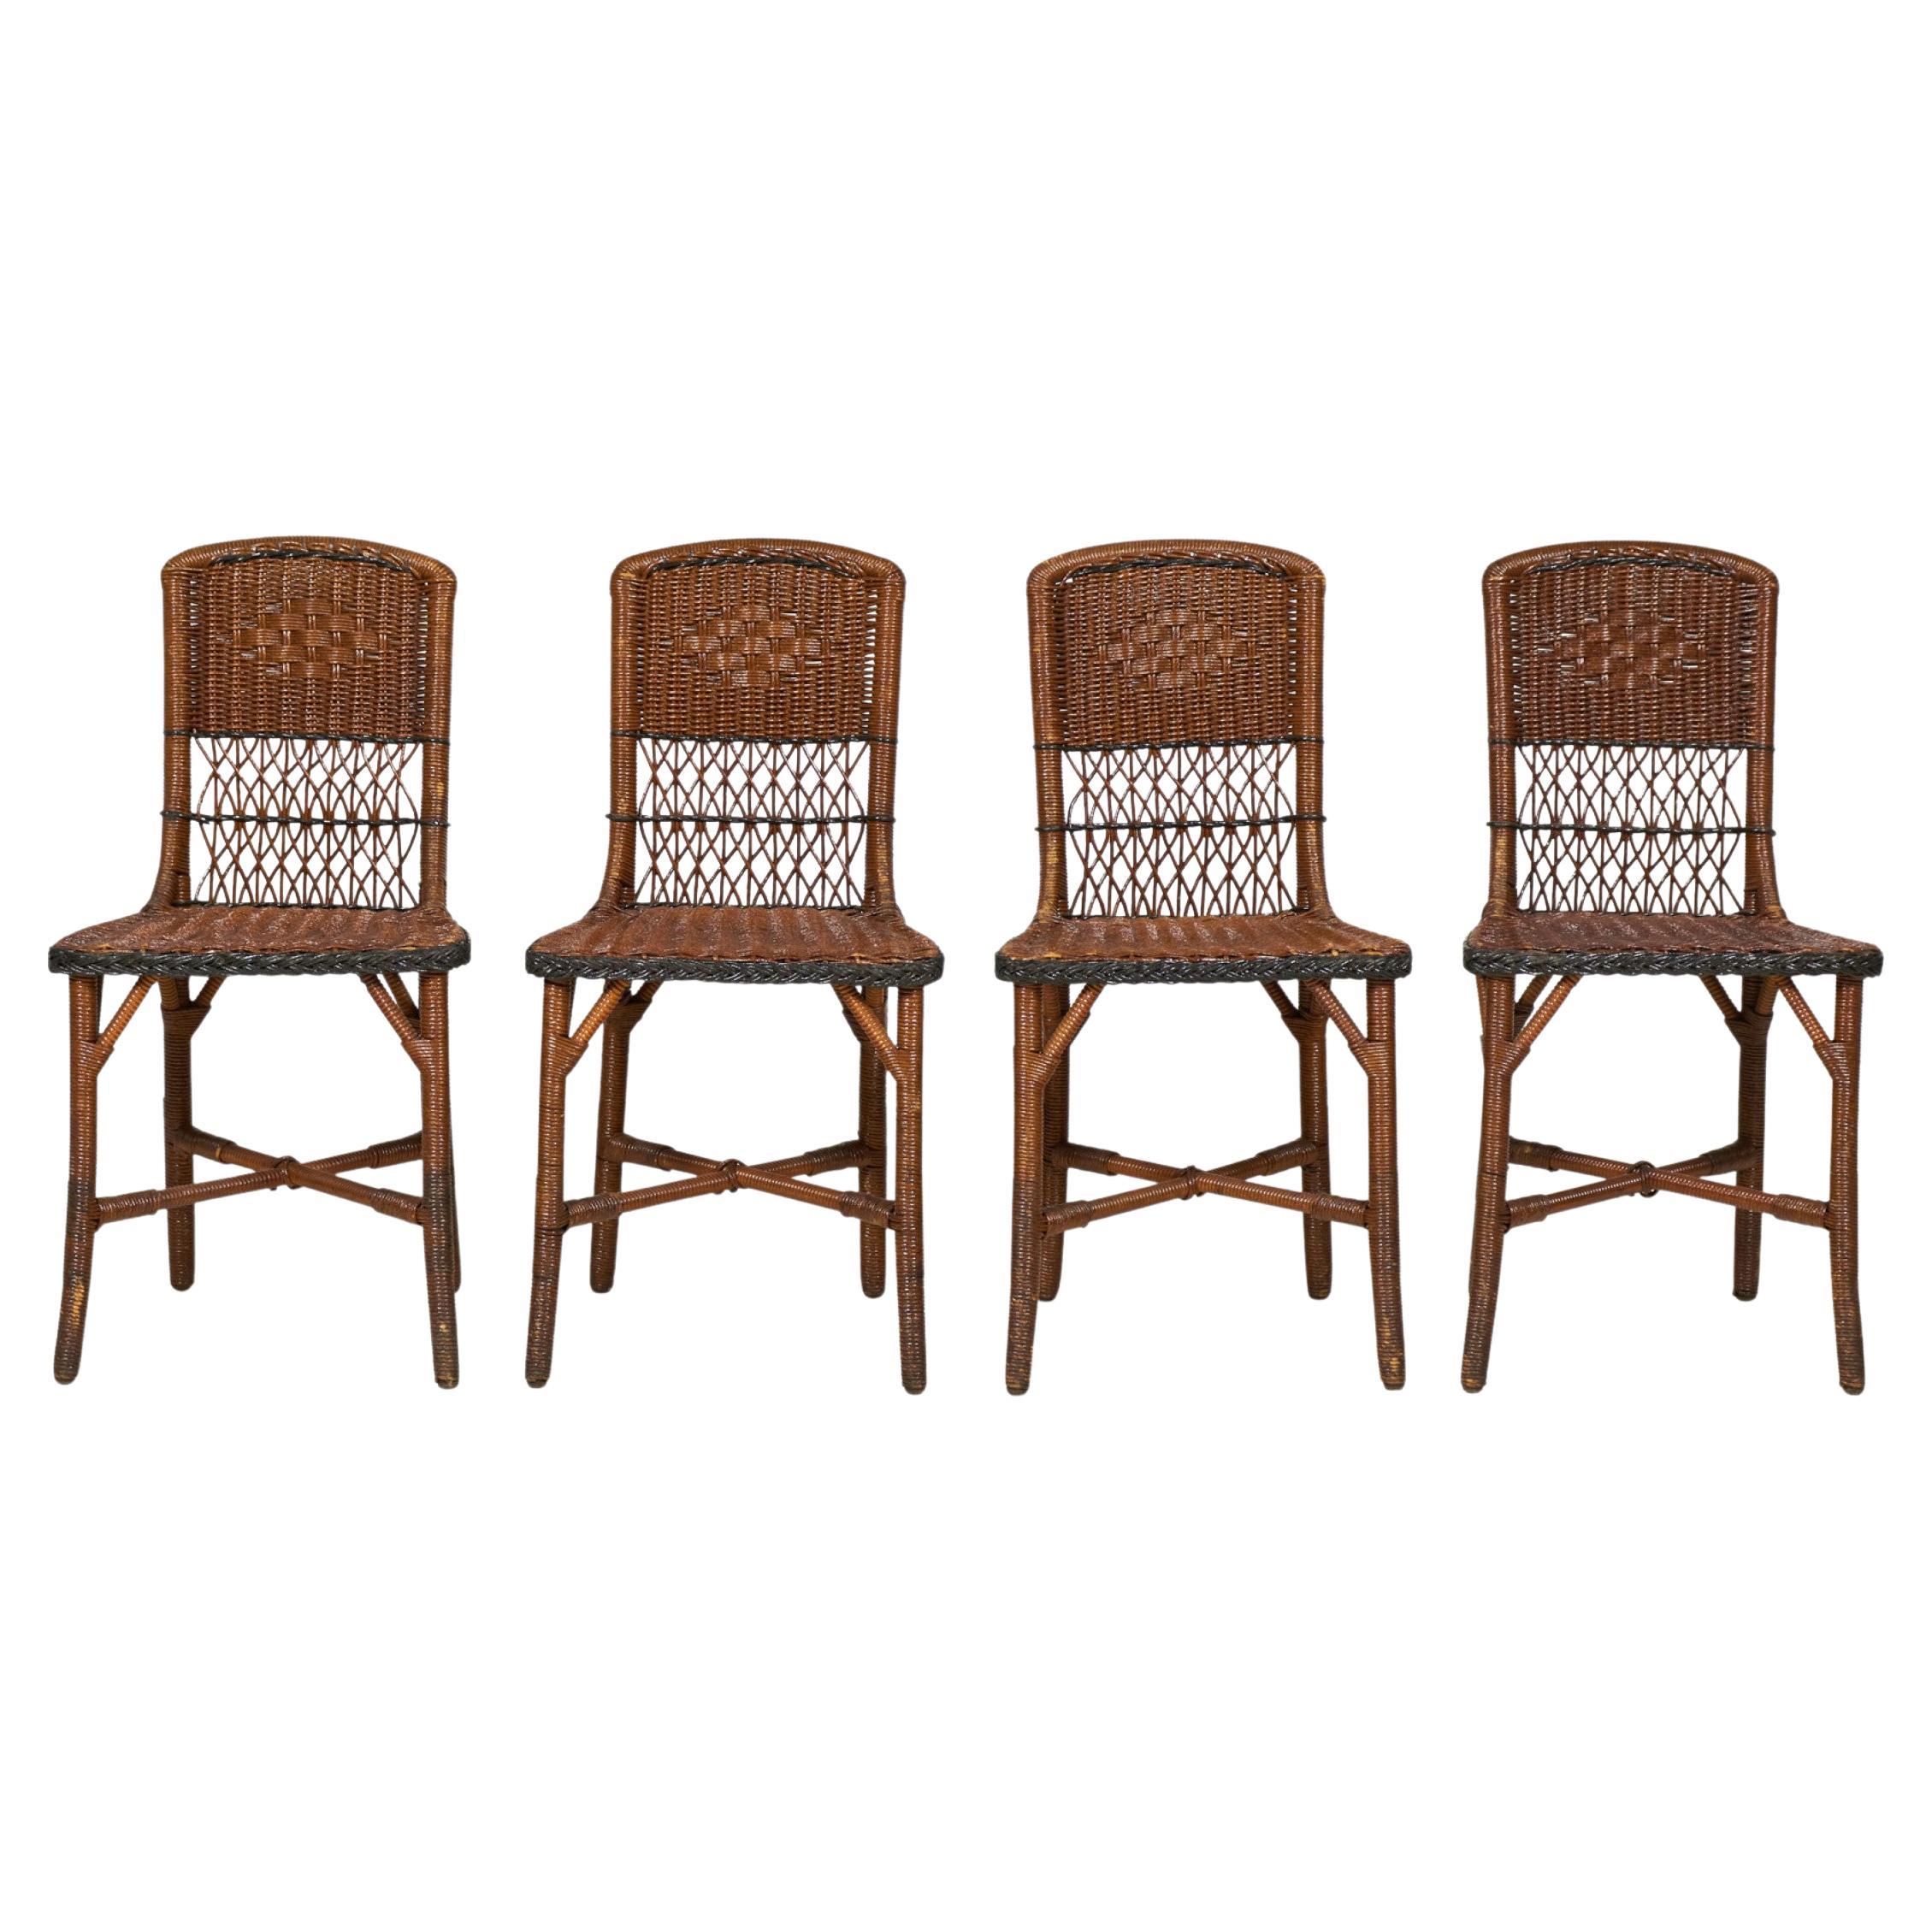 18 American Art Deco Style Brown and Green Wicker Side Chairs